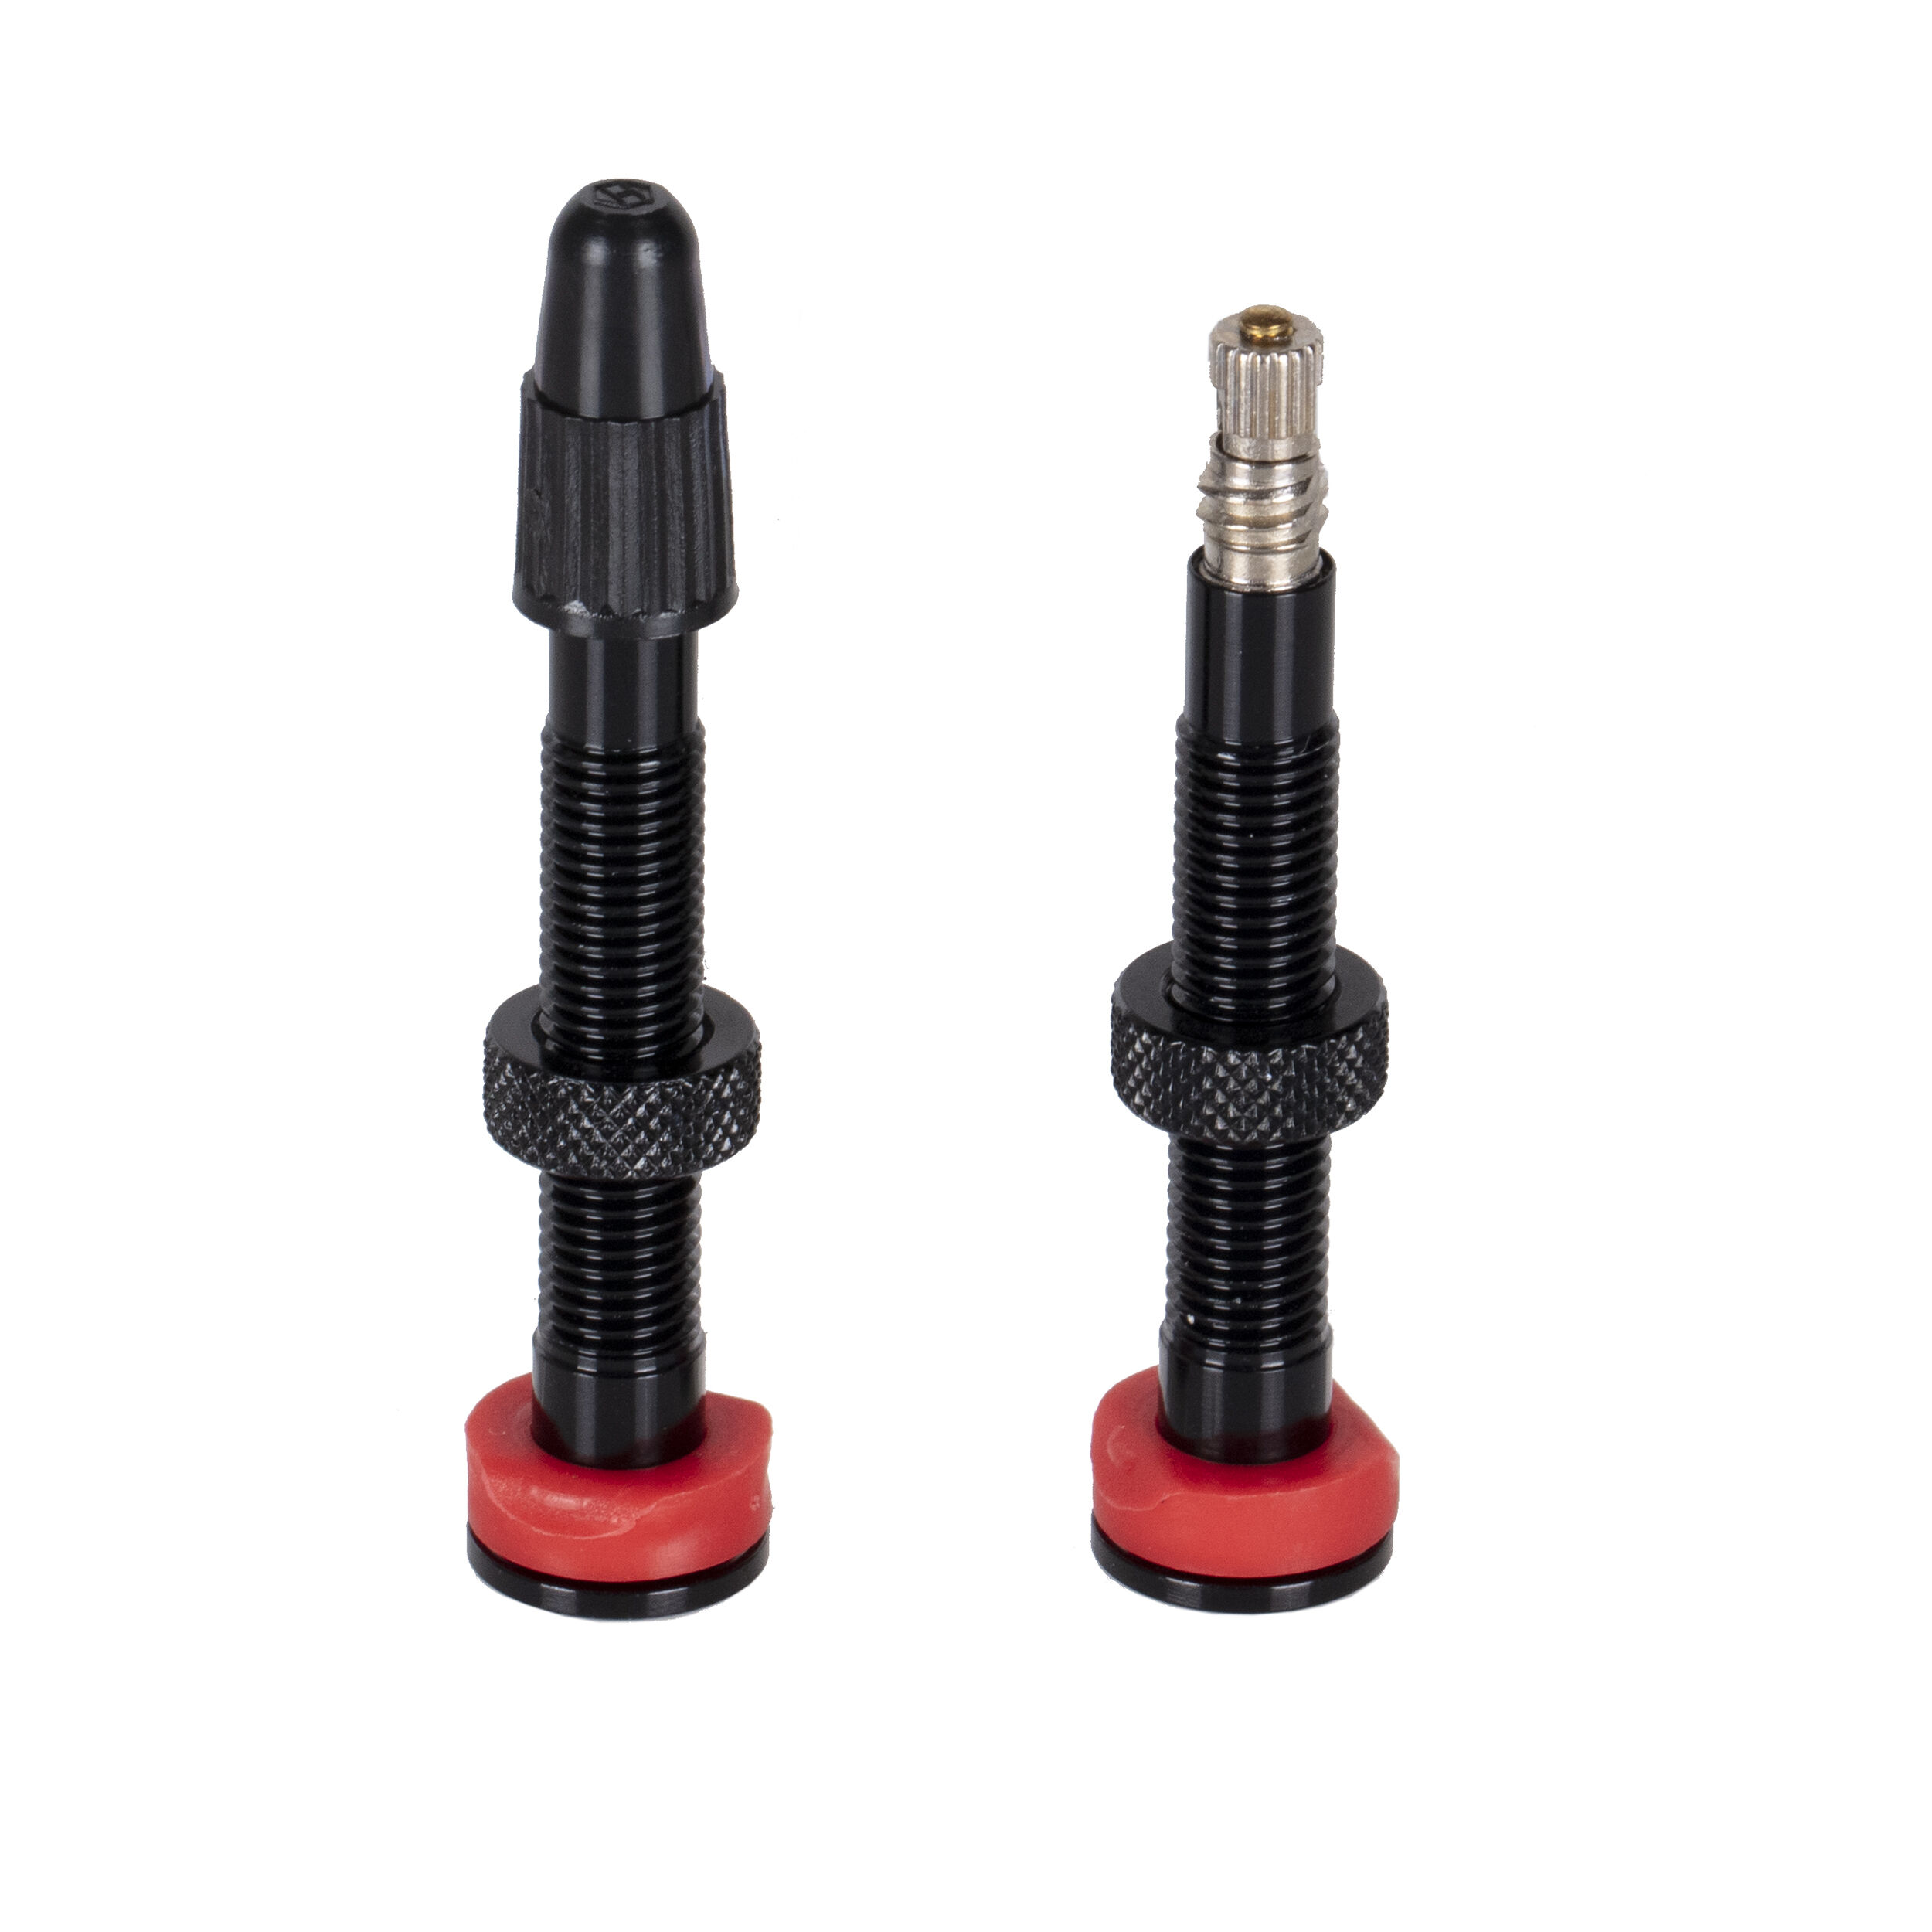 Roval Tubeless Valves - Another Bike Shop